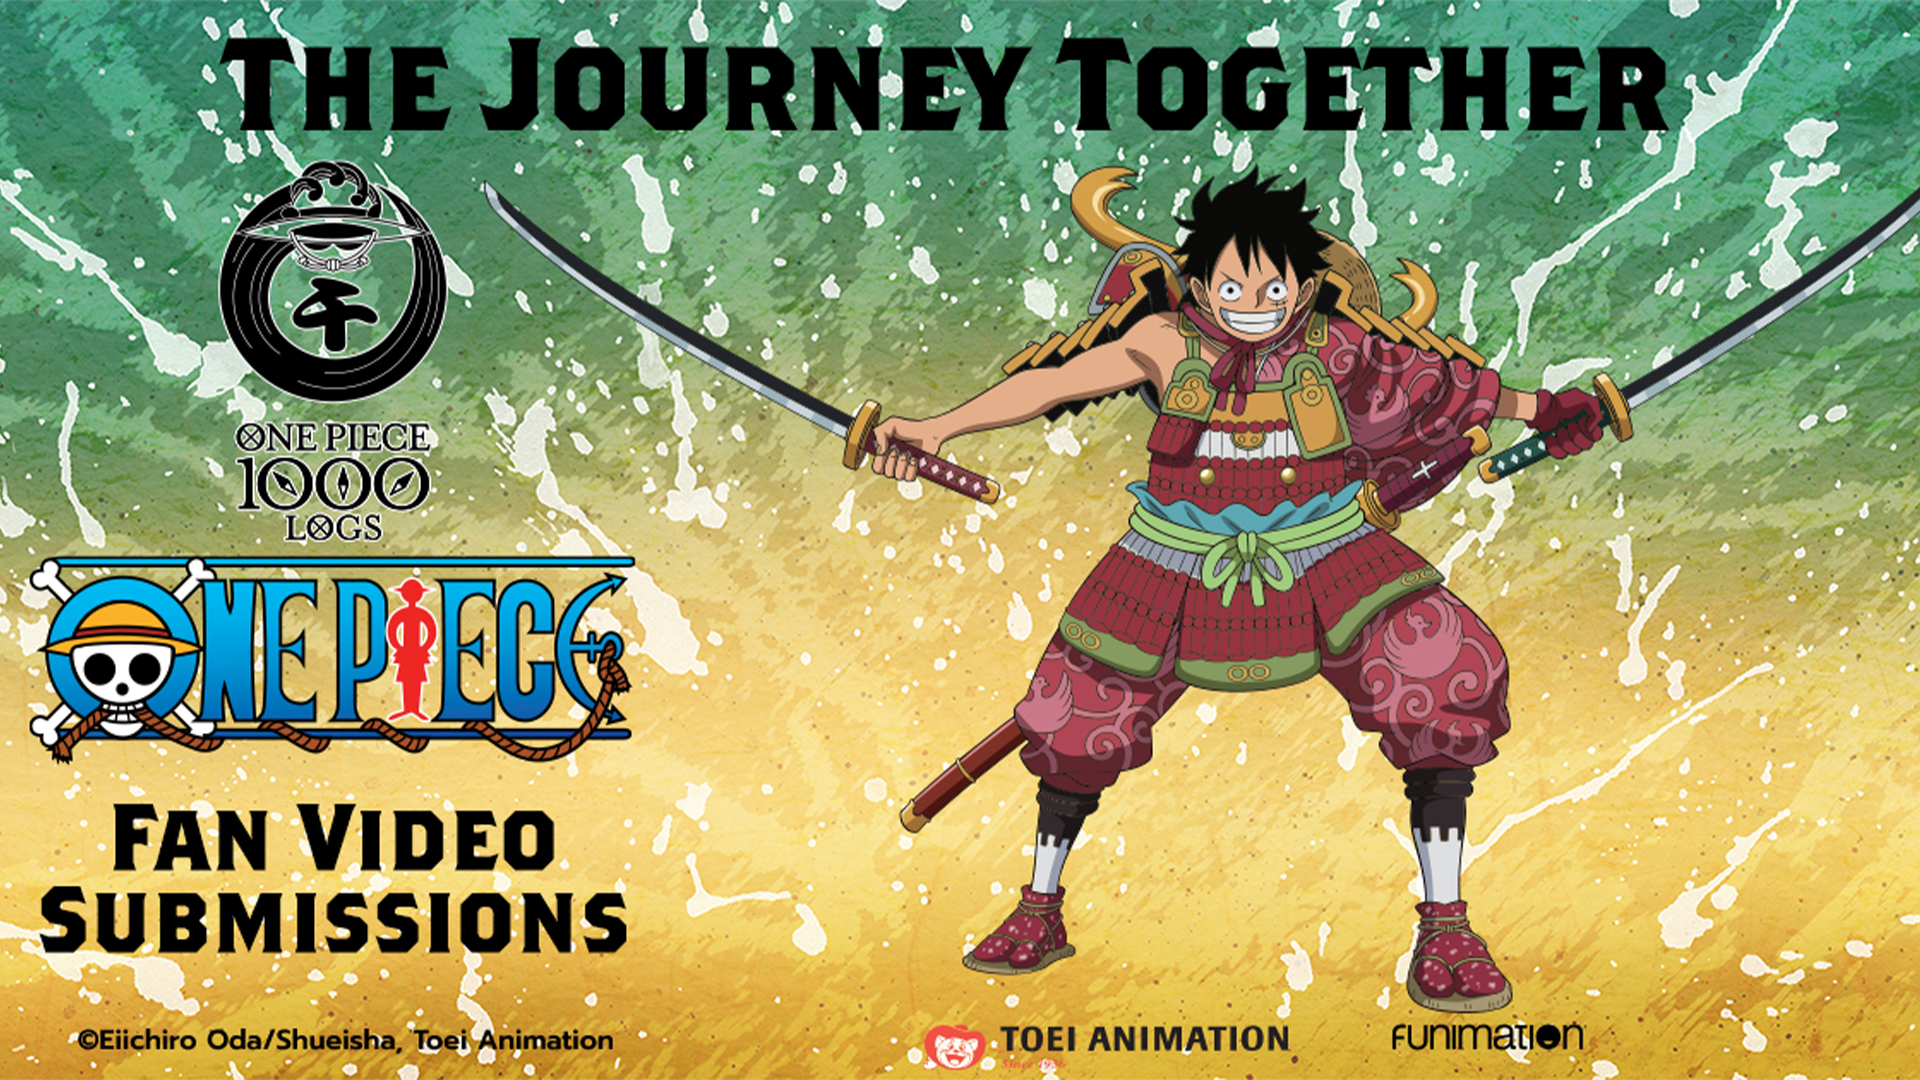 One Piece Yeah Luffy Usually Leaves It Til The Last Minute Too Only One Day Left To Submit Your One Piece Episode 1000 Fan Videos Submit Your 15 Second Video Here